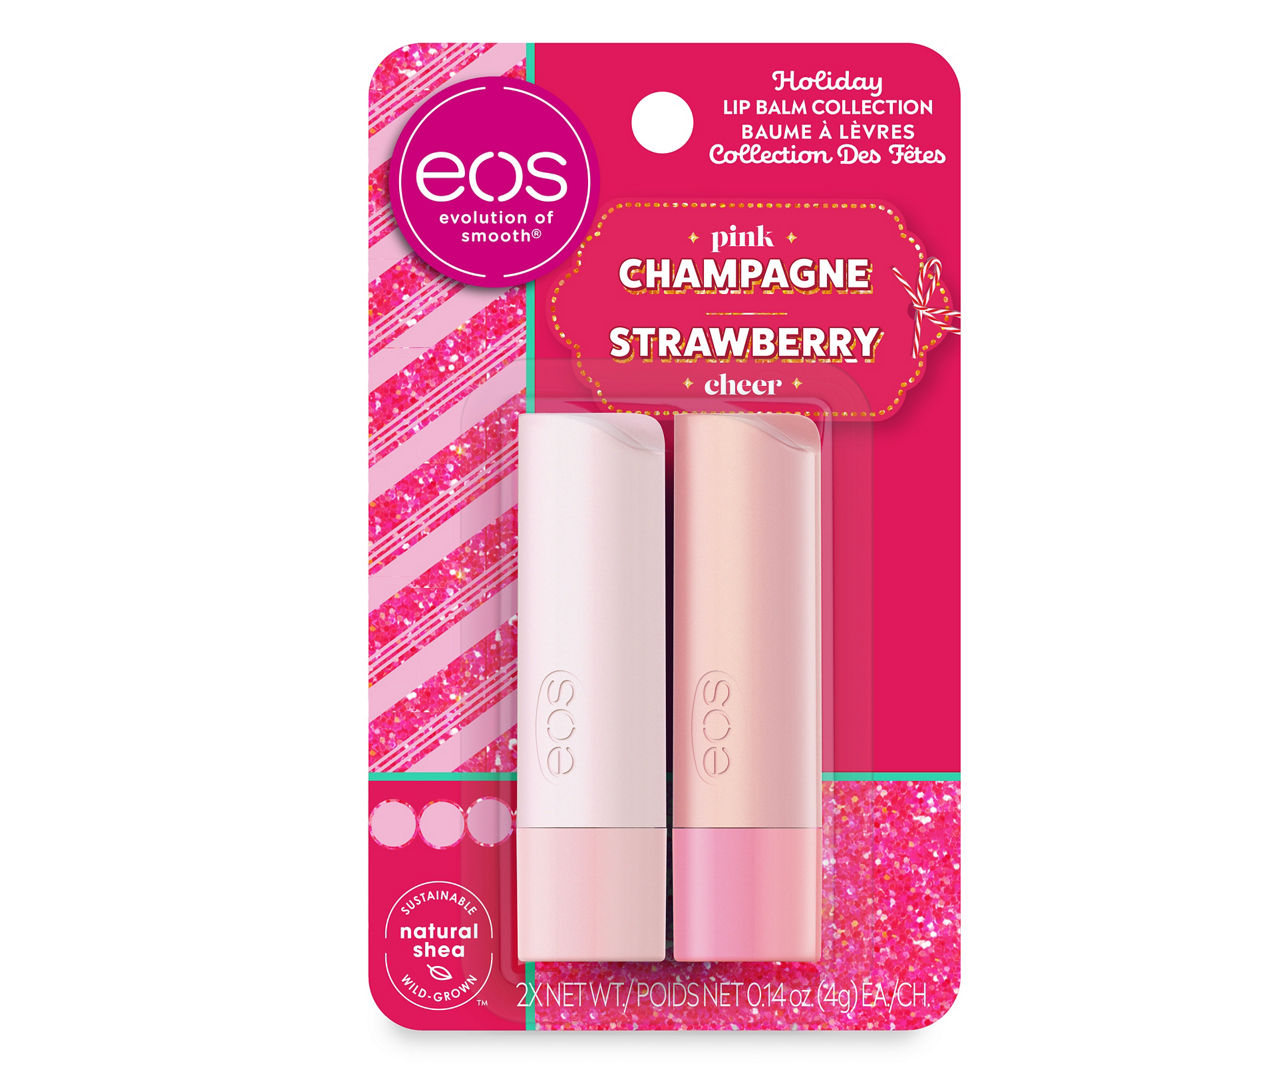 Trives Jet genetisk EOS Pink Champagne & Strawberry Cheer Holiday Lip Balm, 2-Pack | Big Lots